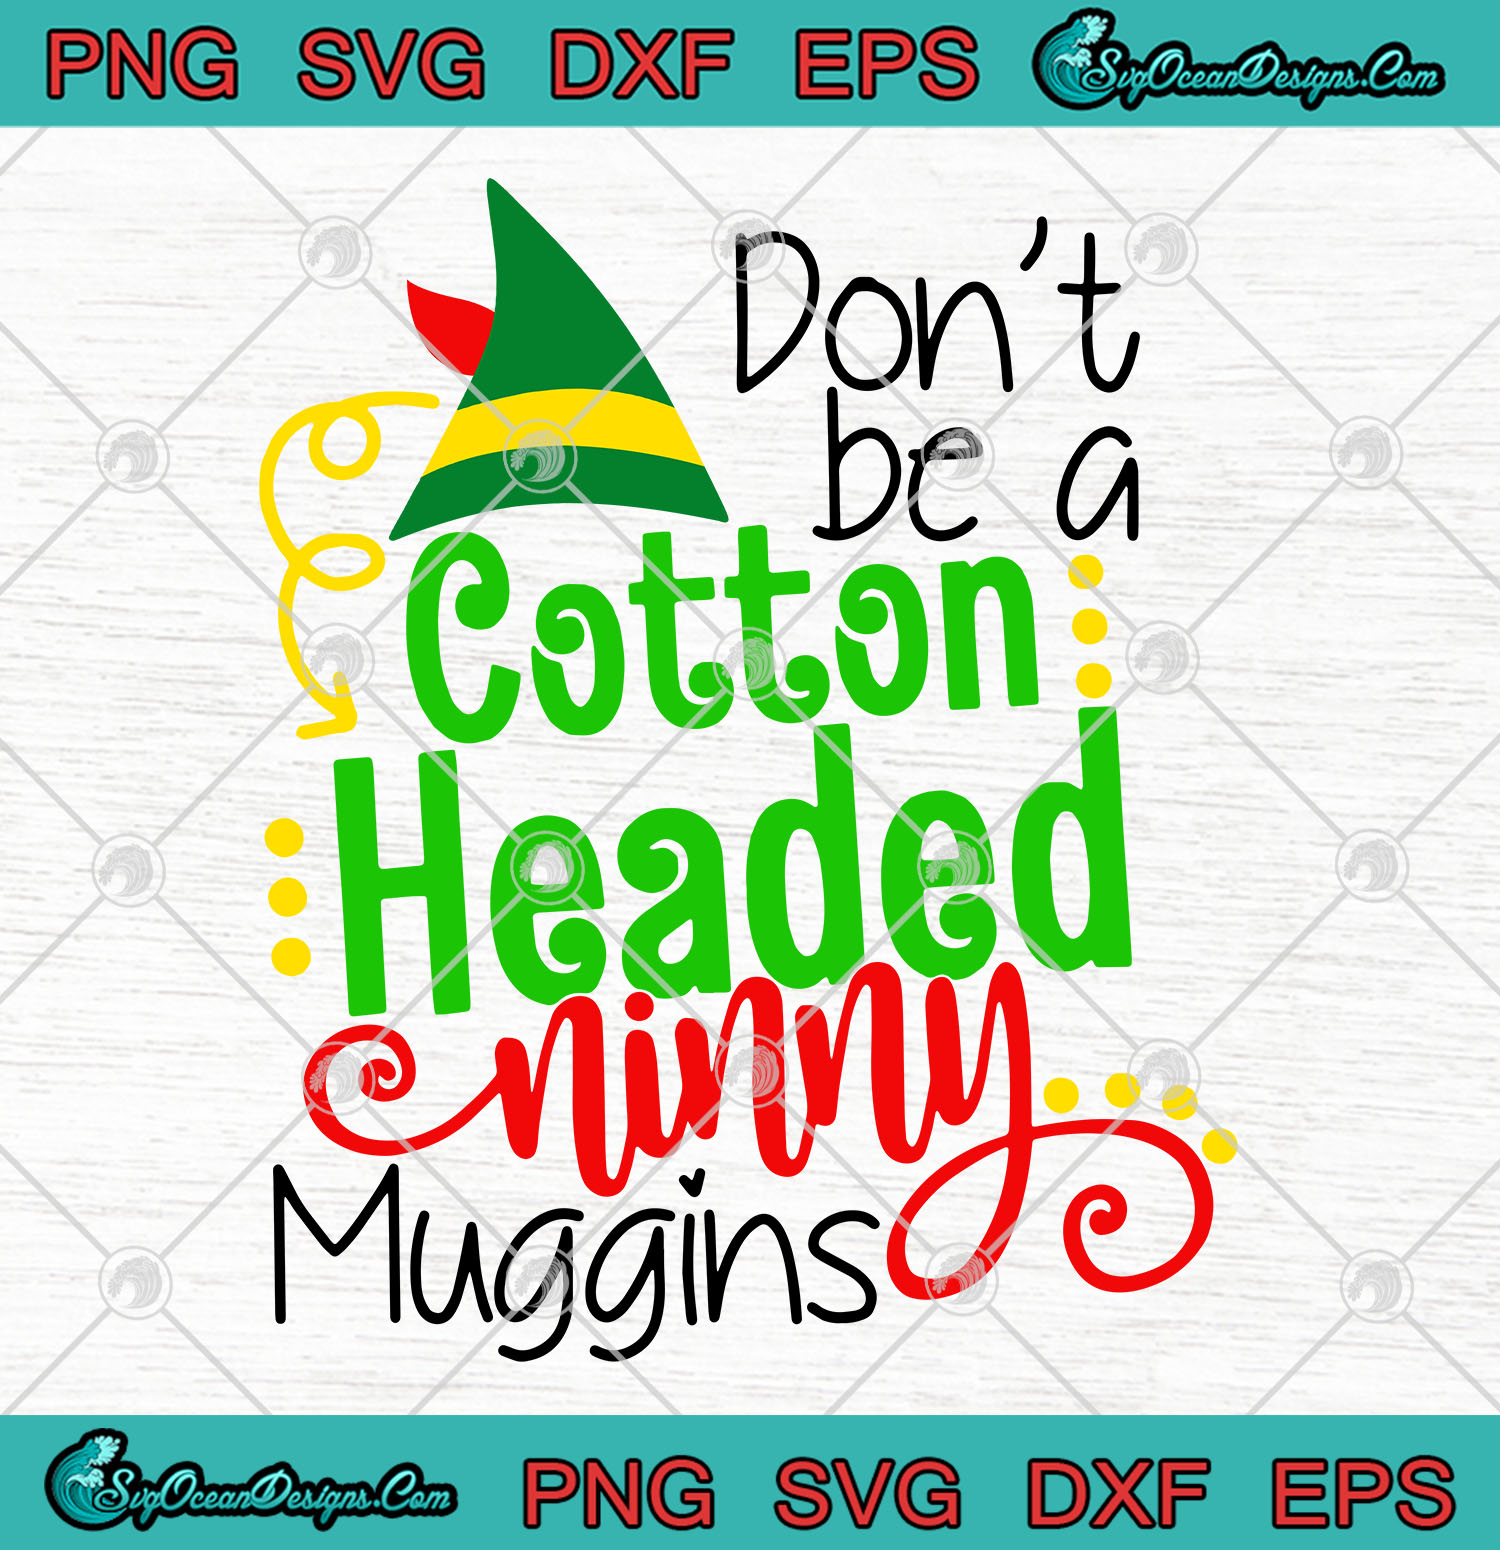 Download Don't be a Cotton Headed Ninny Muggins PNG SVG EPS DXF ...